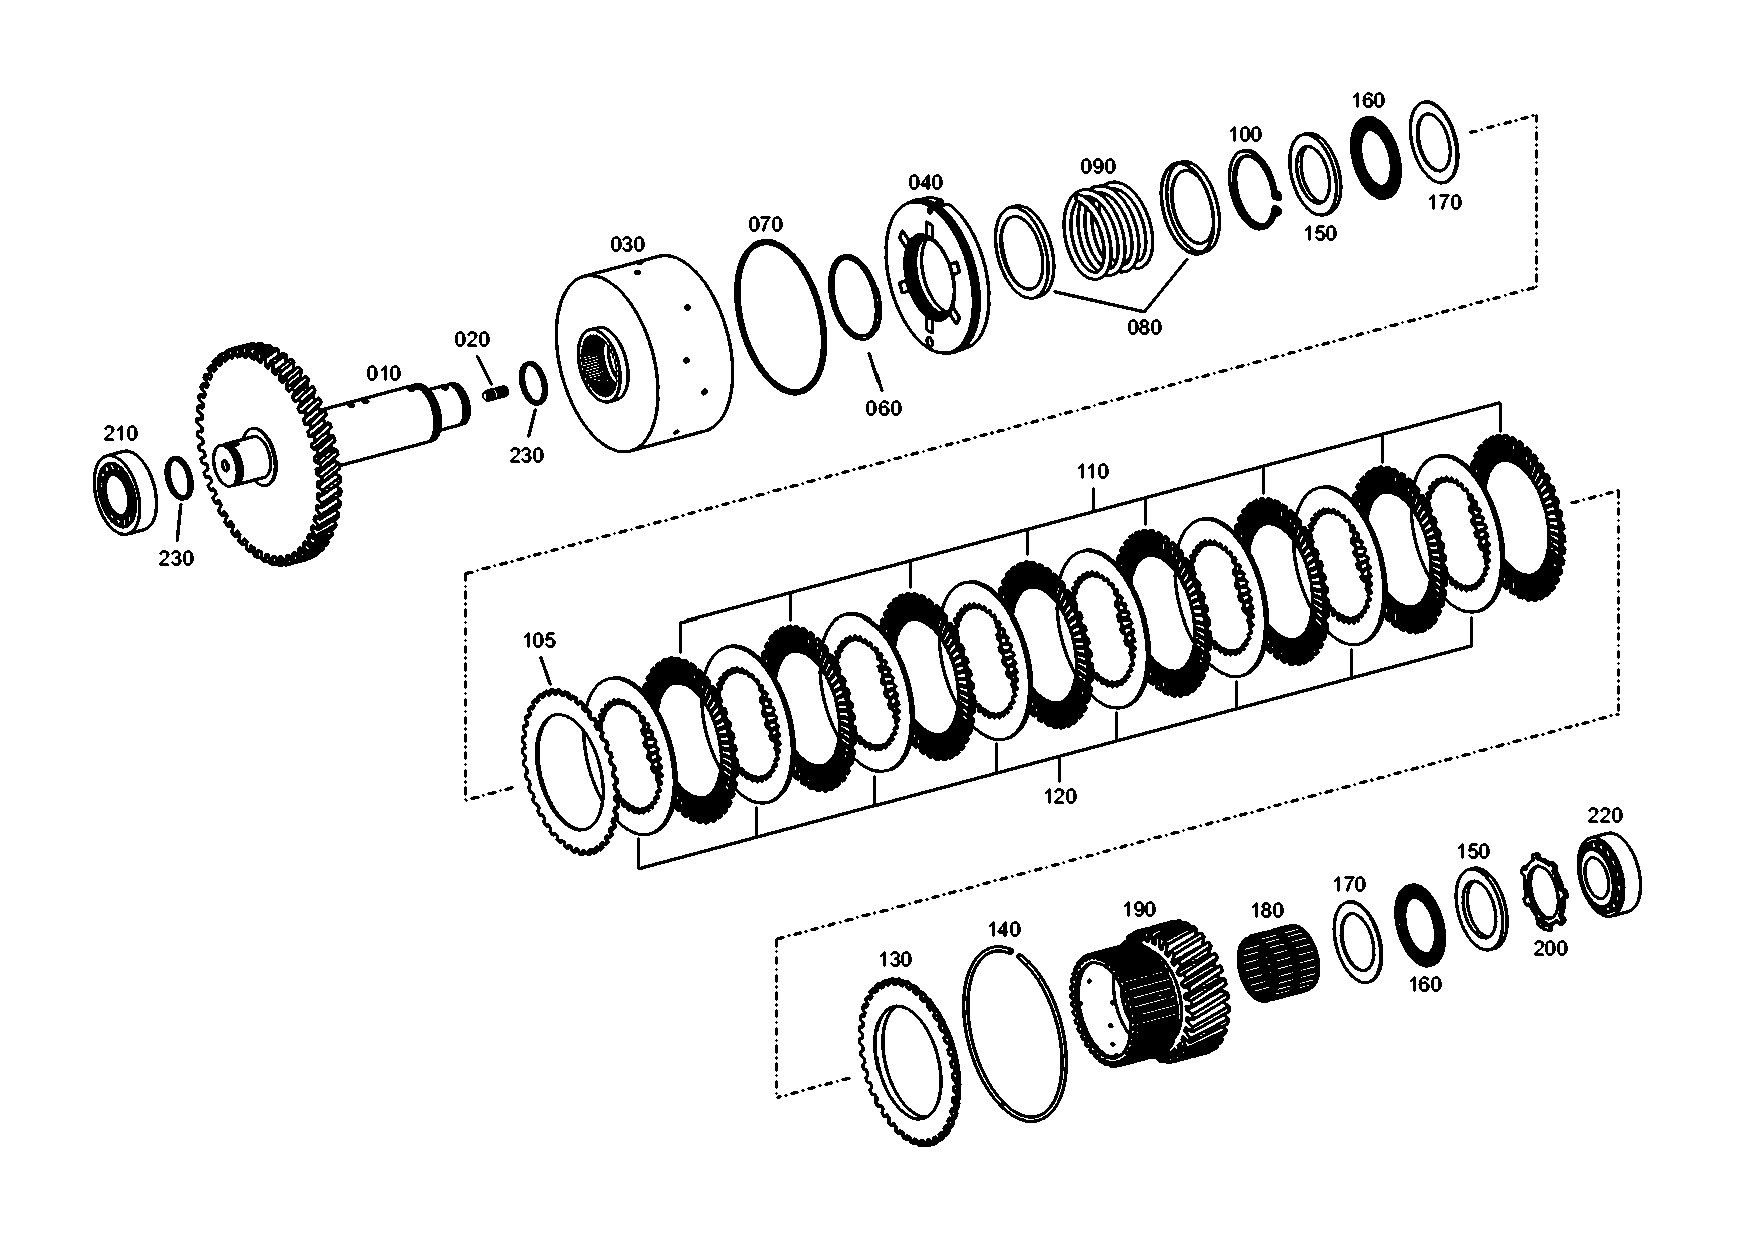 drawing for PPM 6089130 - OUTER CLUTCH DISK (figure 2)